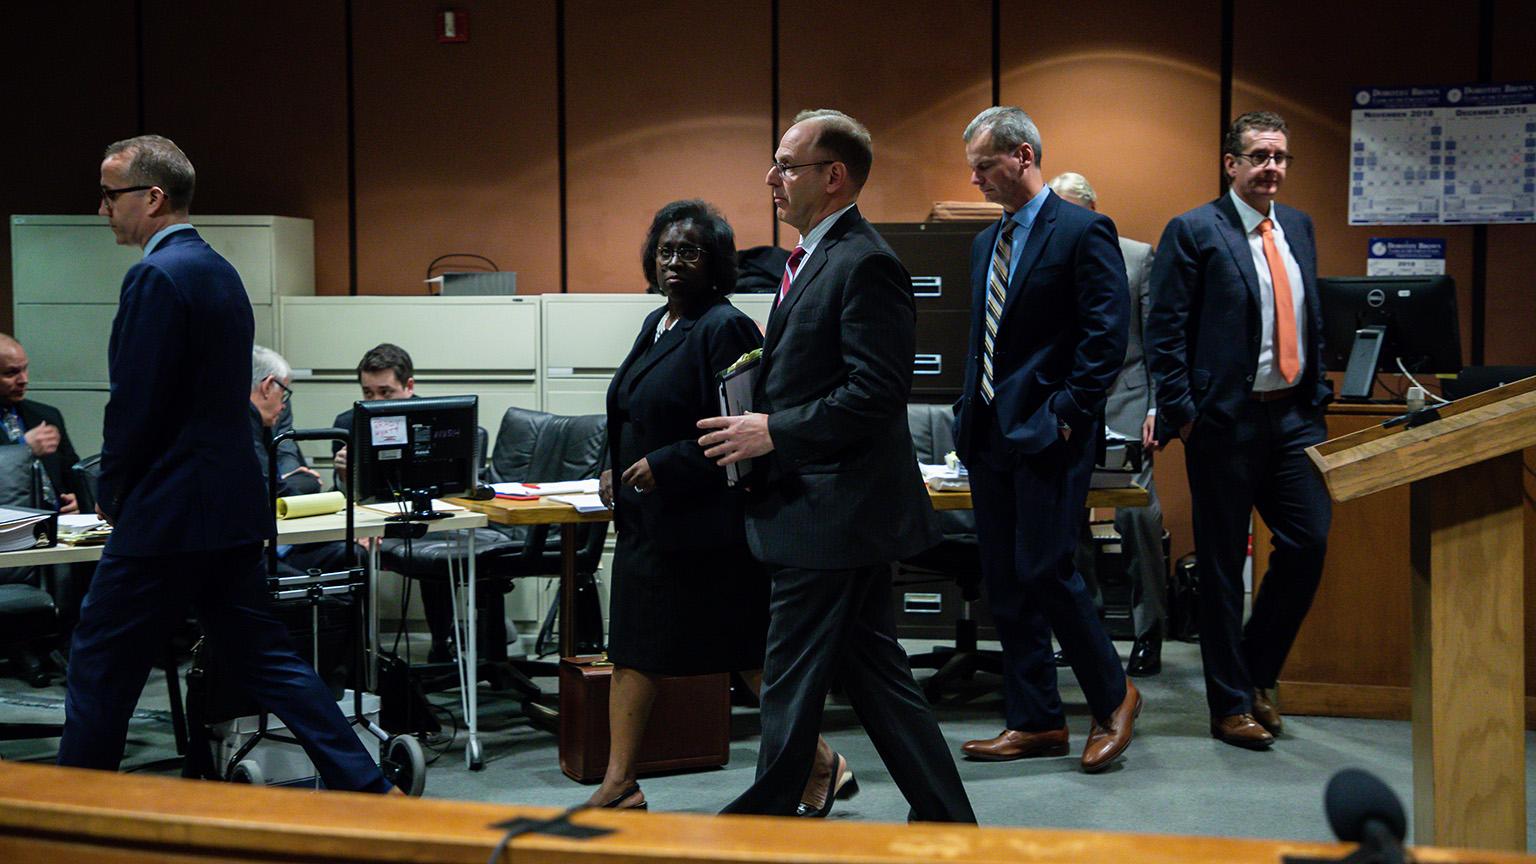 Prosecutors and attorneys confer during the trial of Chicago police Officer Thomas Gaffney, former Detective David March and ex-Officer Joseph Walsh with Judge Domenica A. Stephenson on Thursday, Nov. 29, 2018. (Zbigniew Bzdak / Chicago Tribune / Pool)